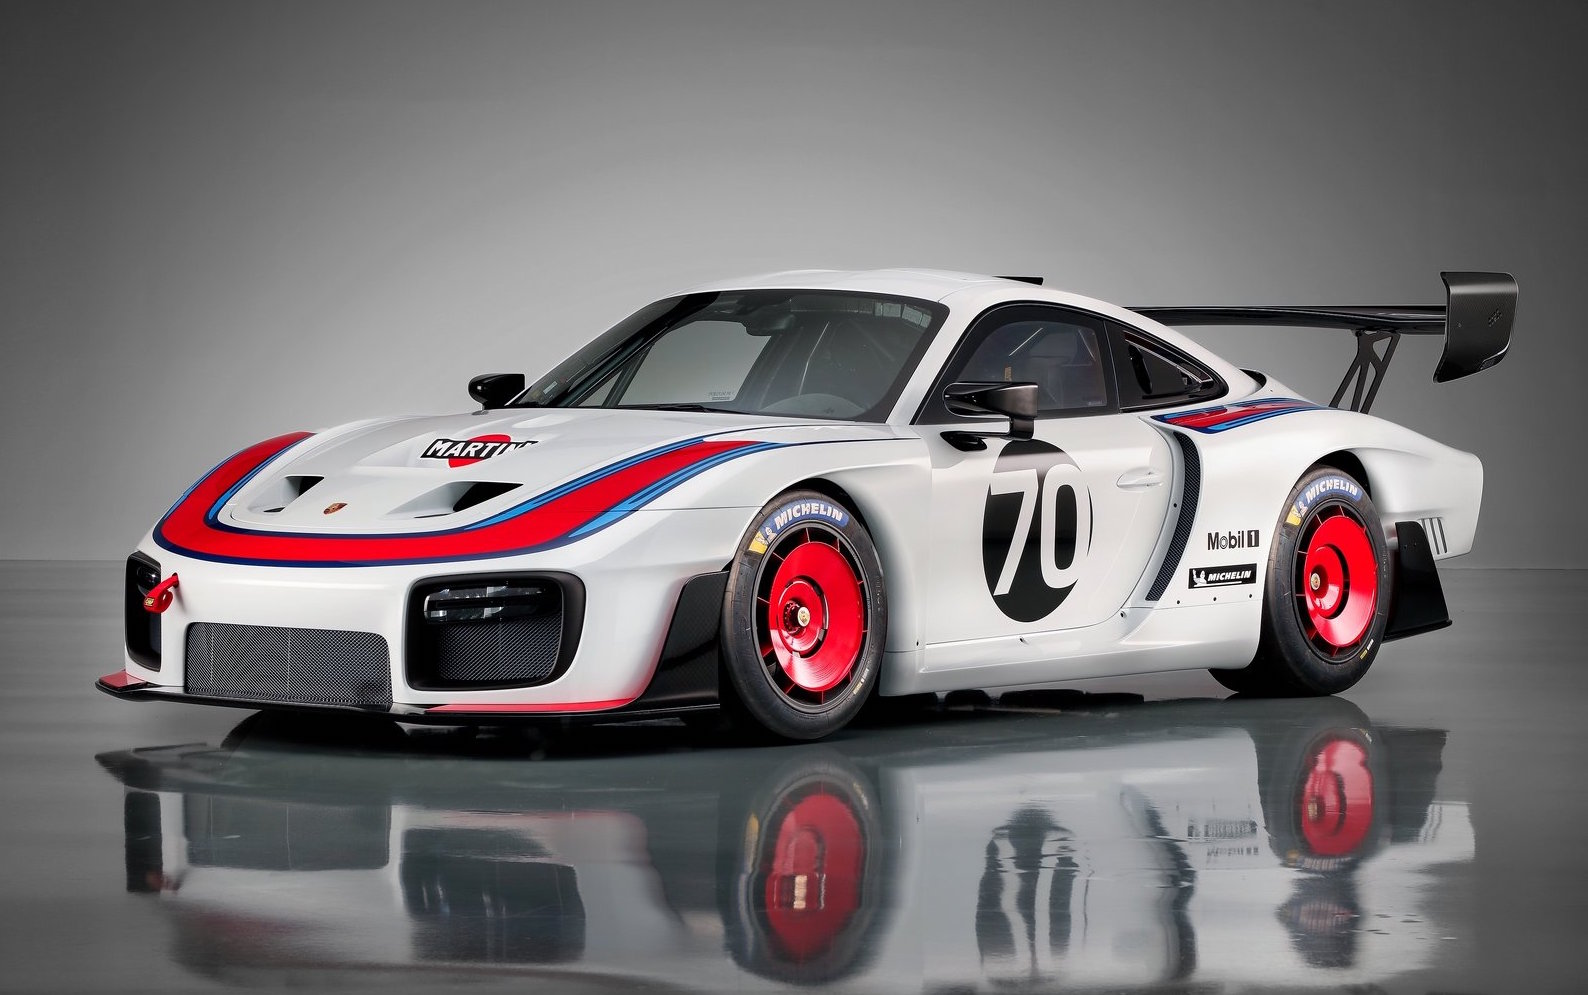 2019 Porsche 935 revealed, limited production available